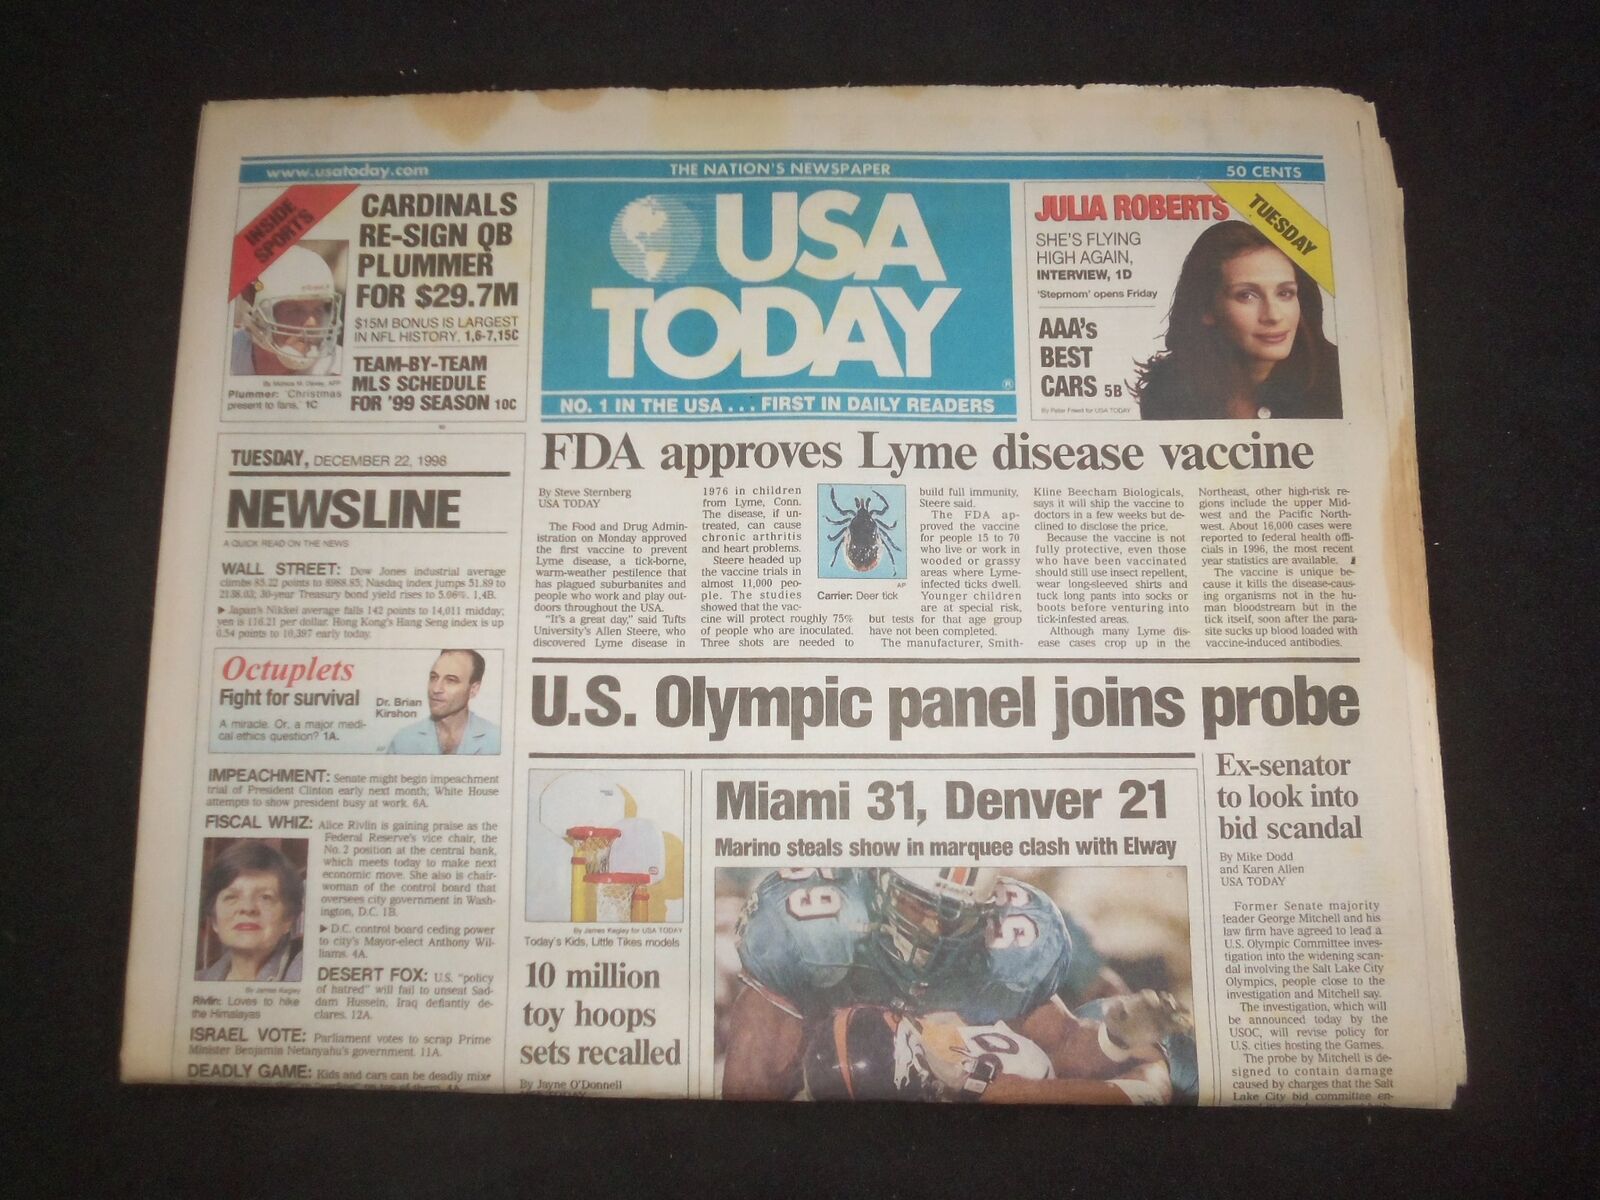 1998 DECEMBER 22 USA TODAY NEWSPAPER -FDA APPROVES LYME DISEASE VACCINE- NP 7979